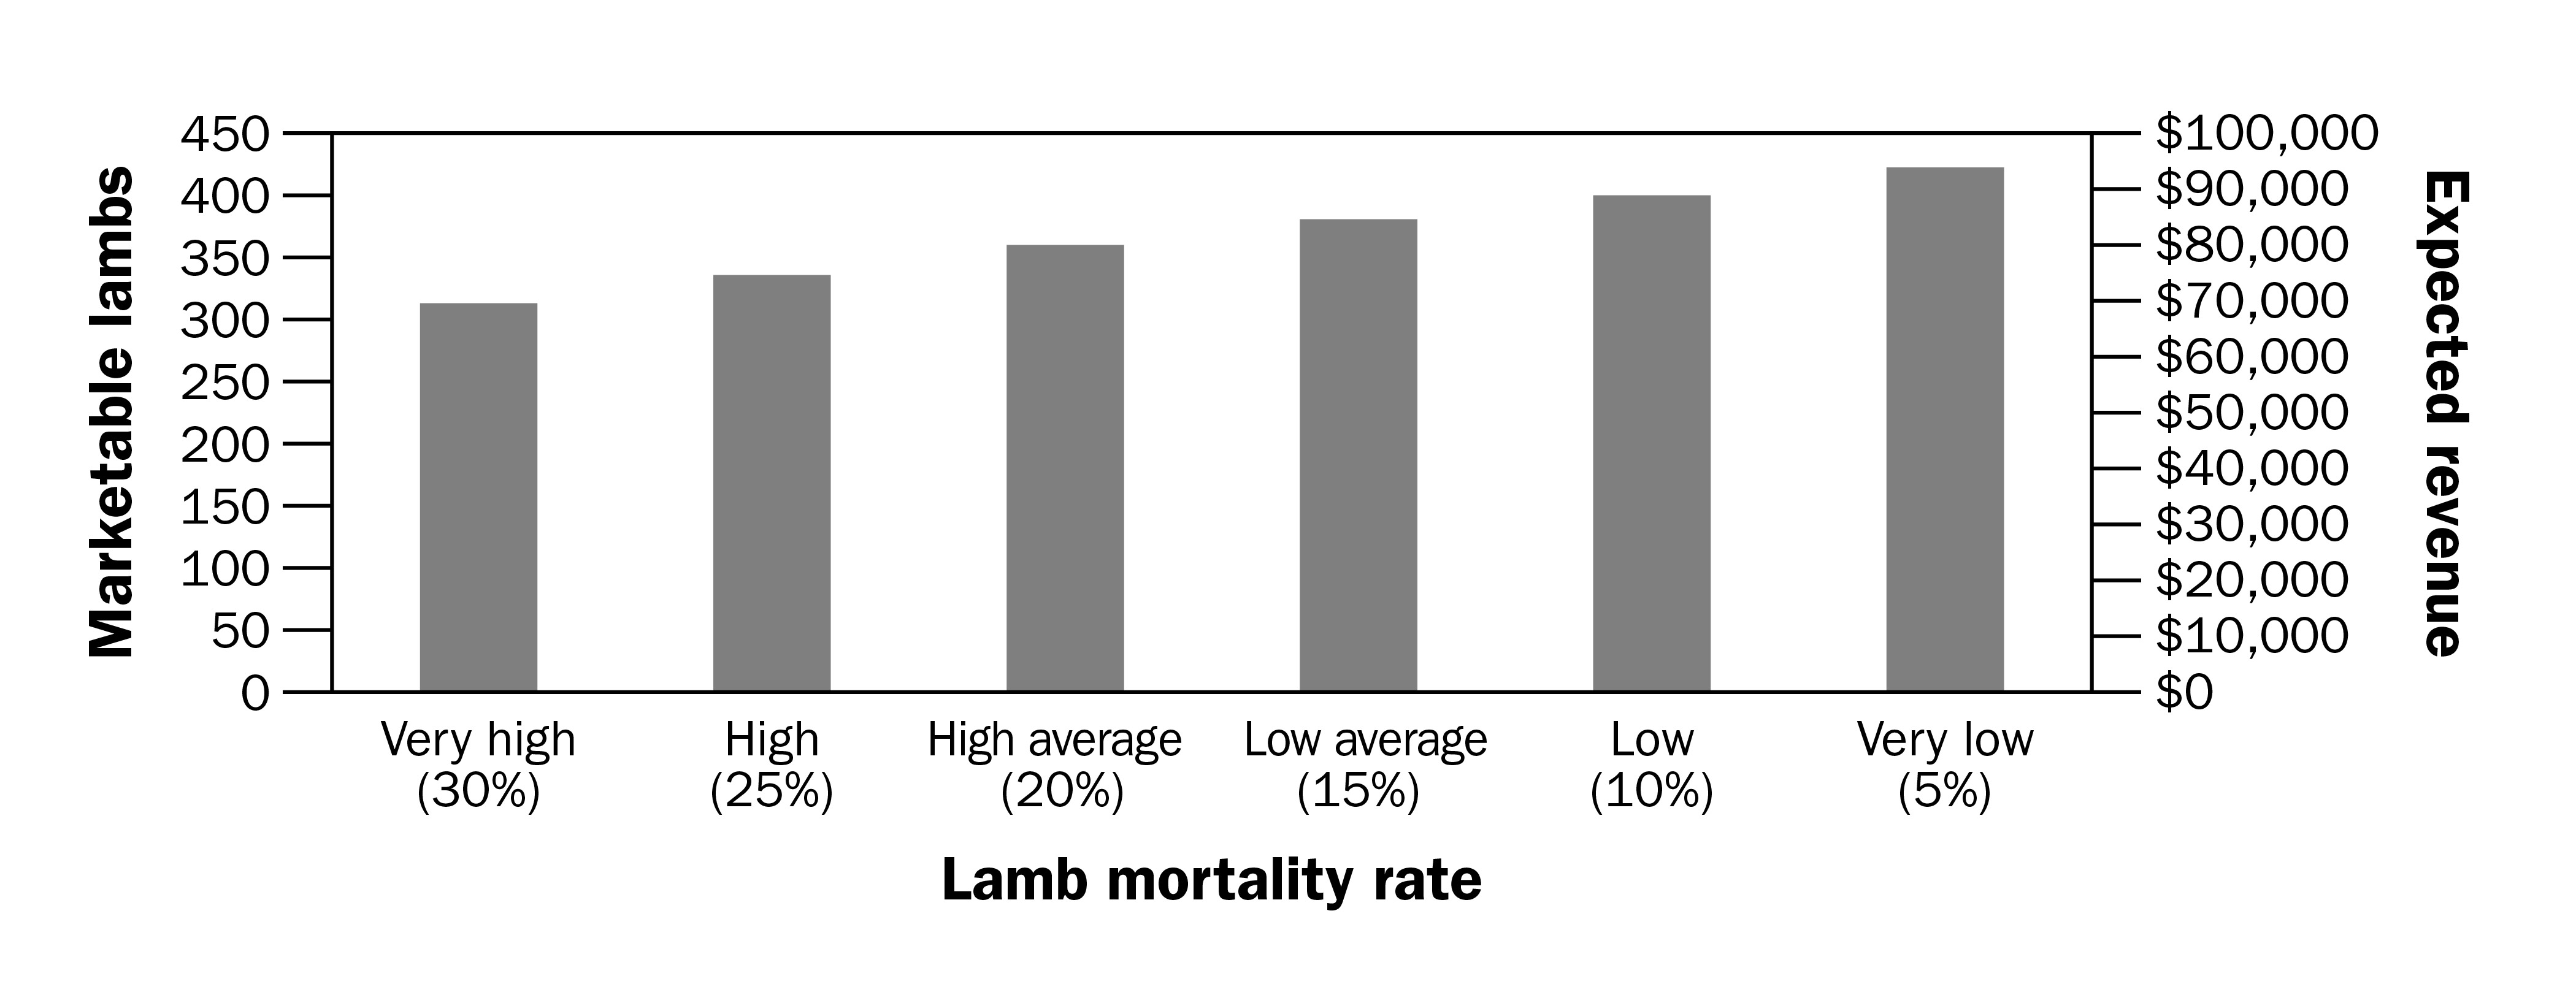 Bar graph with marketable lambs on left axis from 0 to 450. Expected Revenue from 0$ to $100,000 on the right axis. Lamb mortality rate on the bottom with very high on the left side and very low on the right side.